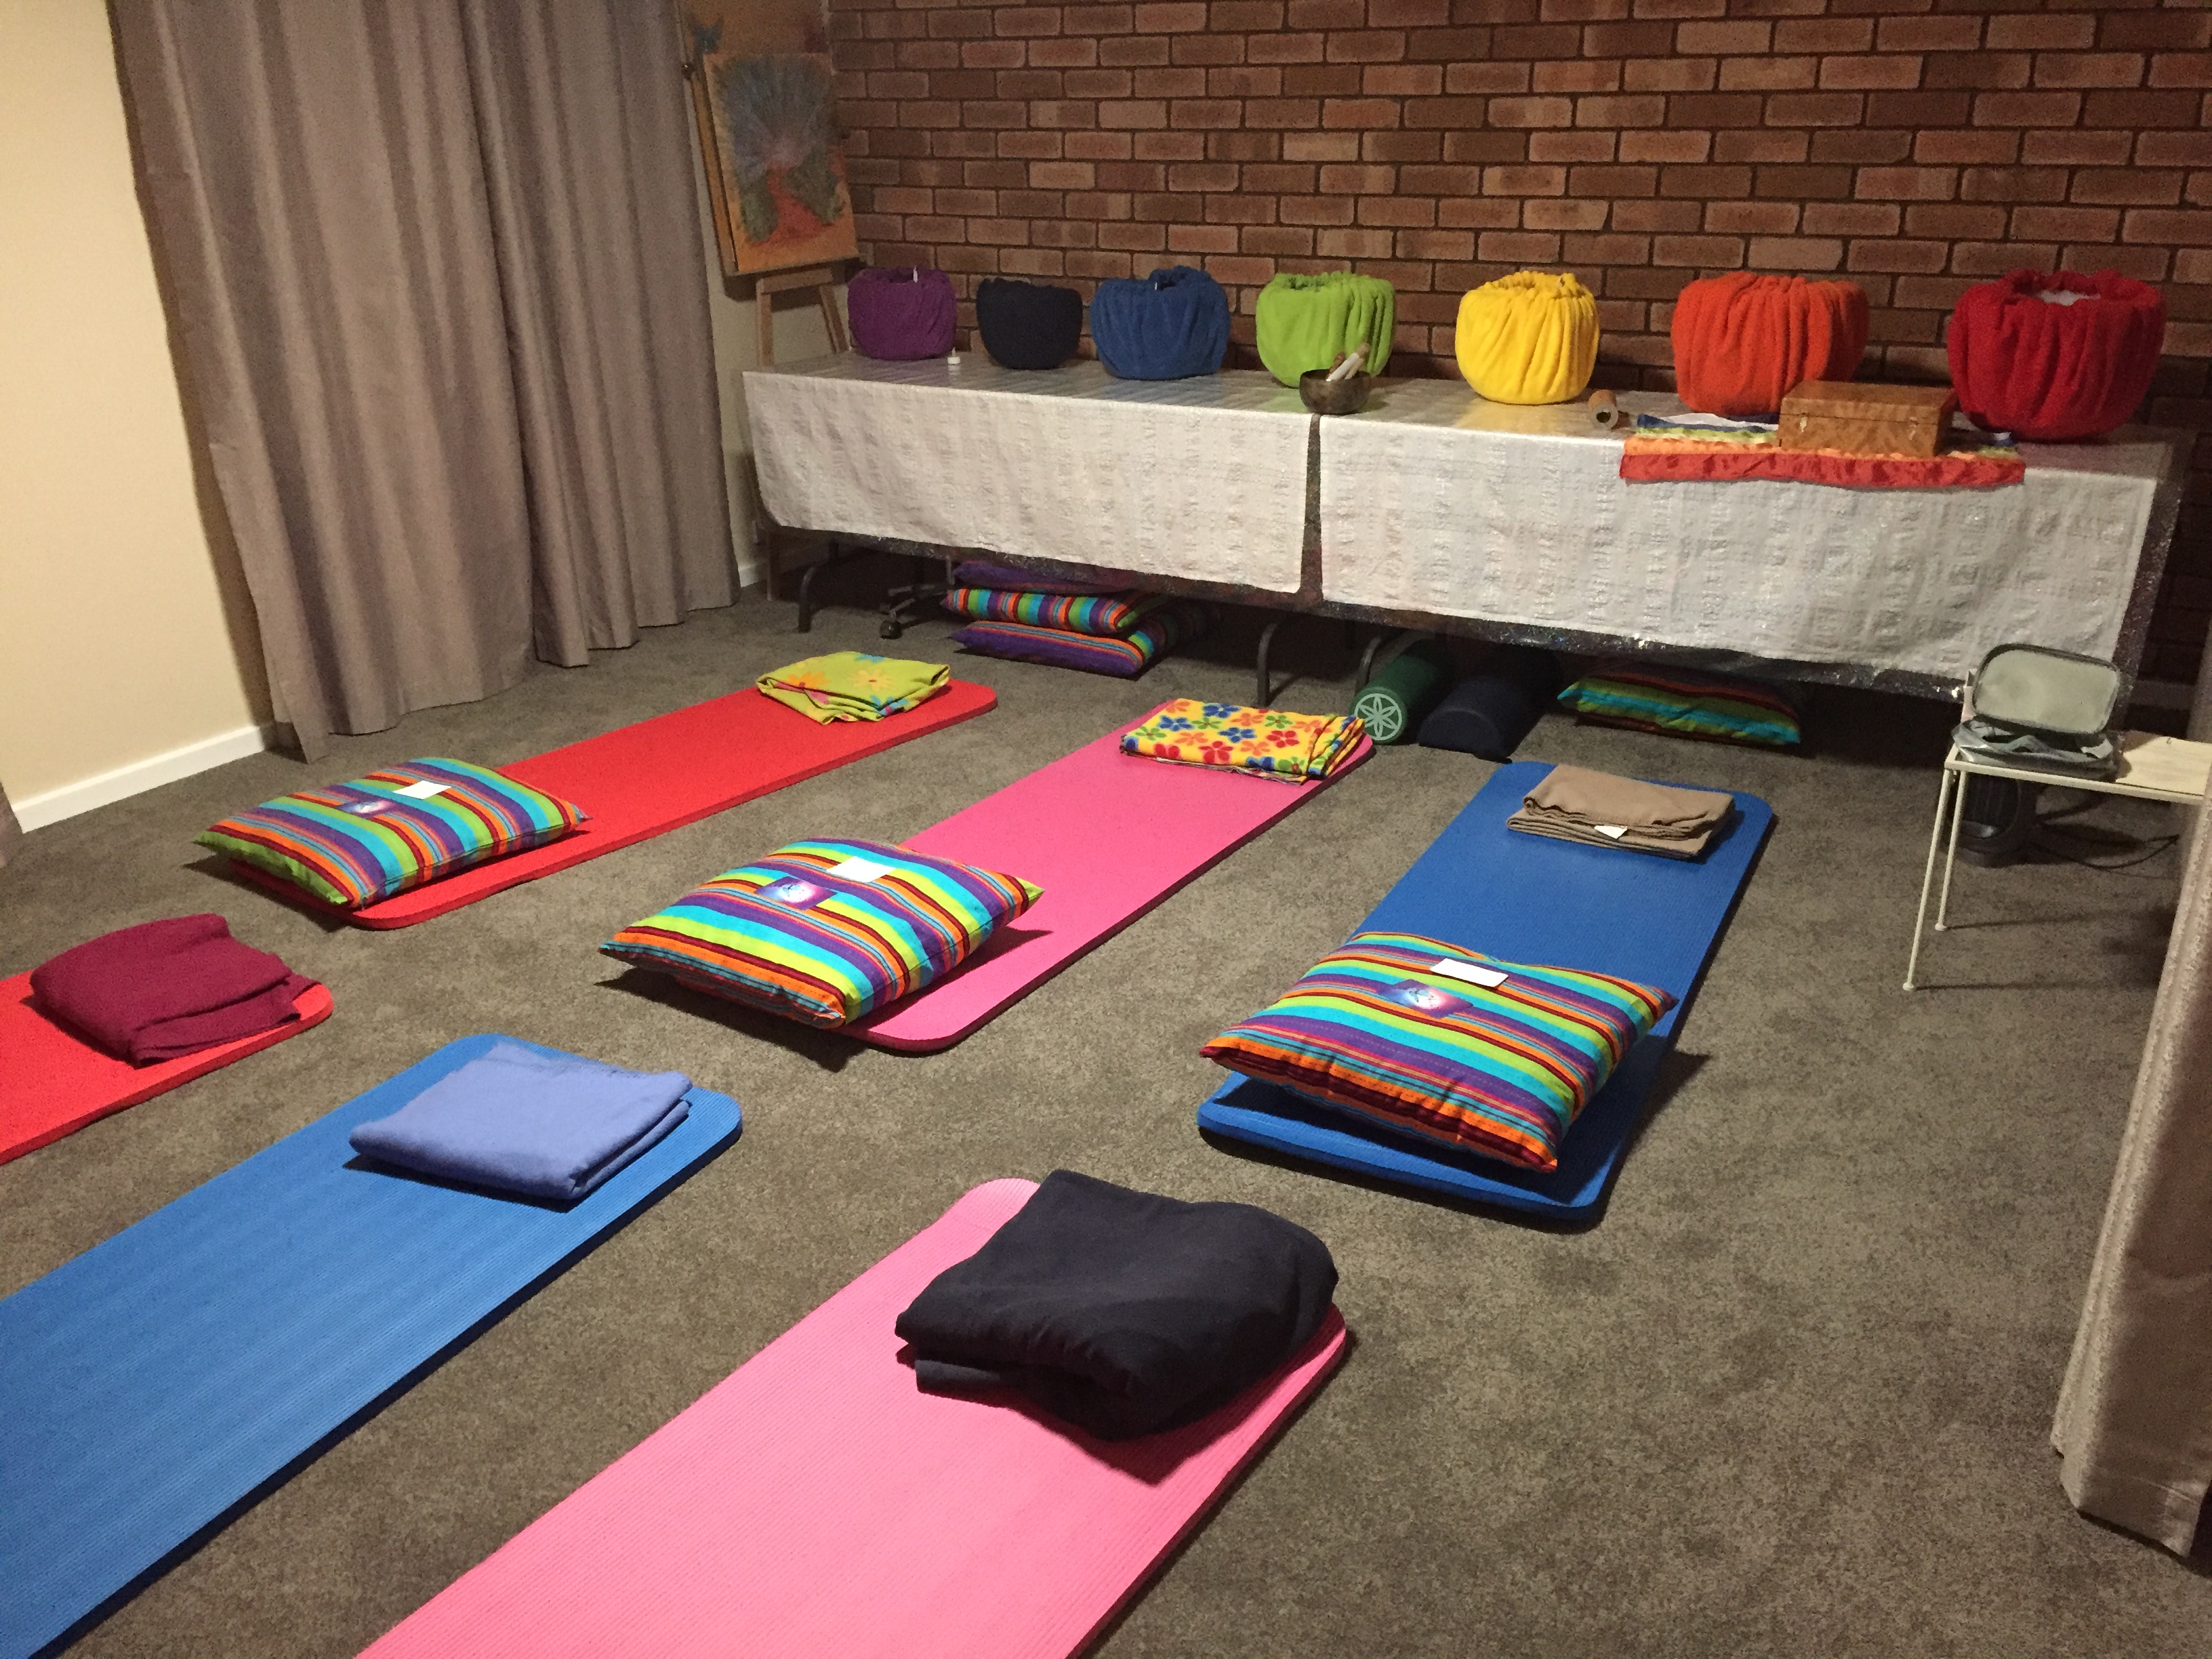 Angel Light offers group Sound Healing Meditation sessions using crystal bowls, chimes and gong in the Hamilton Hill, Cockburn / Fremantle Area in Perth, Western Australia